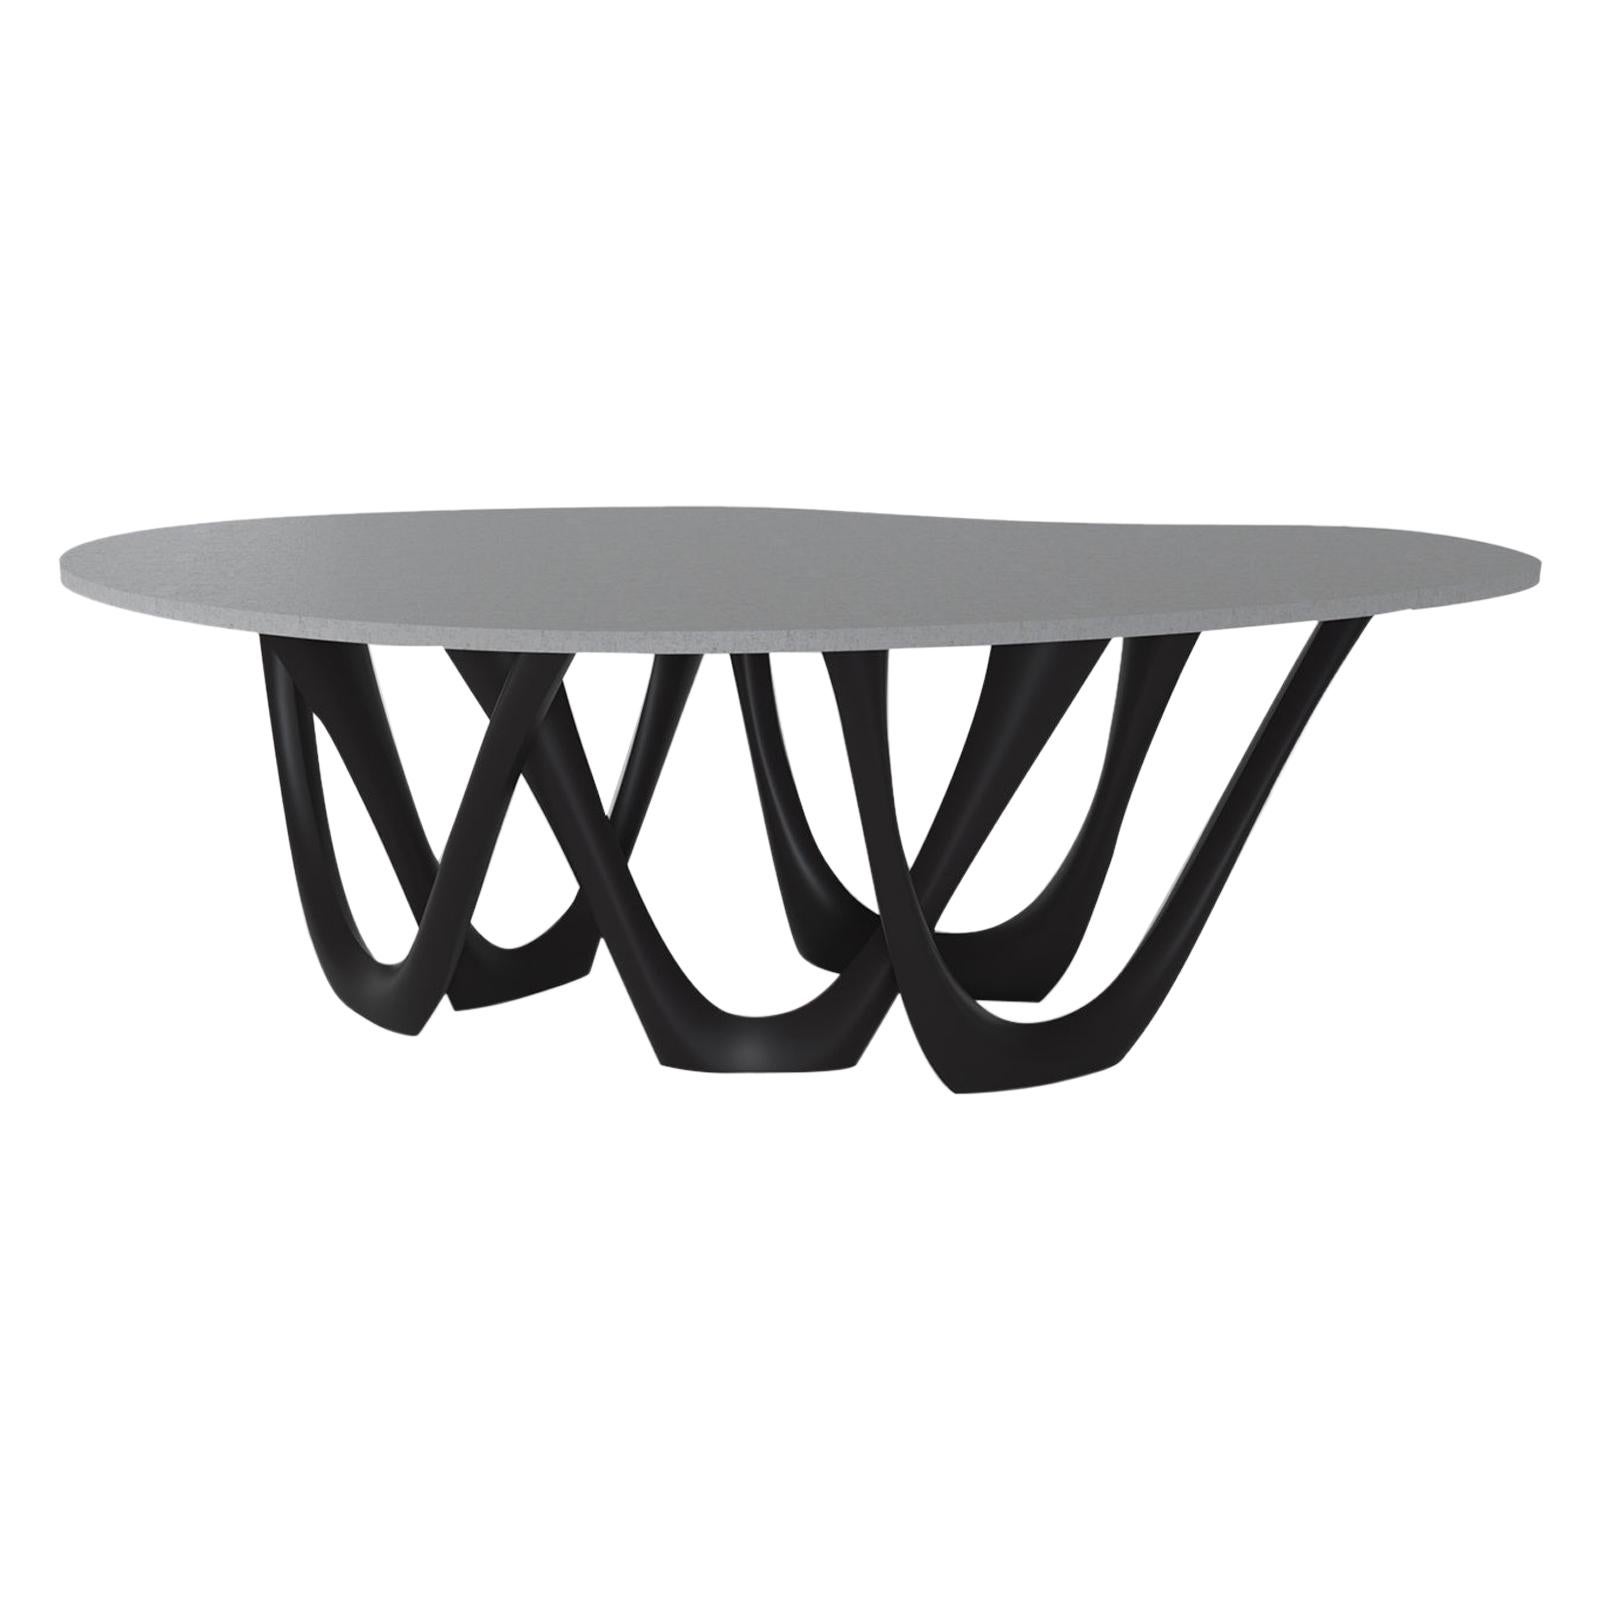 G-Table by Zieta, Brushed Inox Base and Concrete Top For Sale